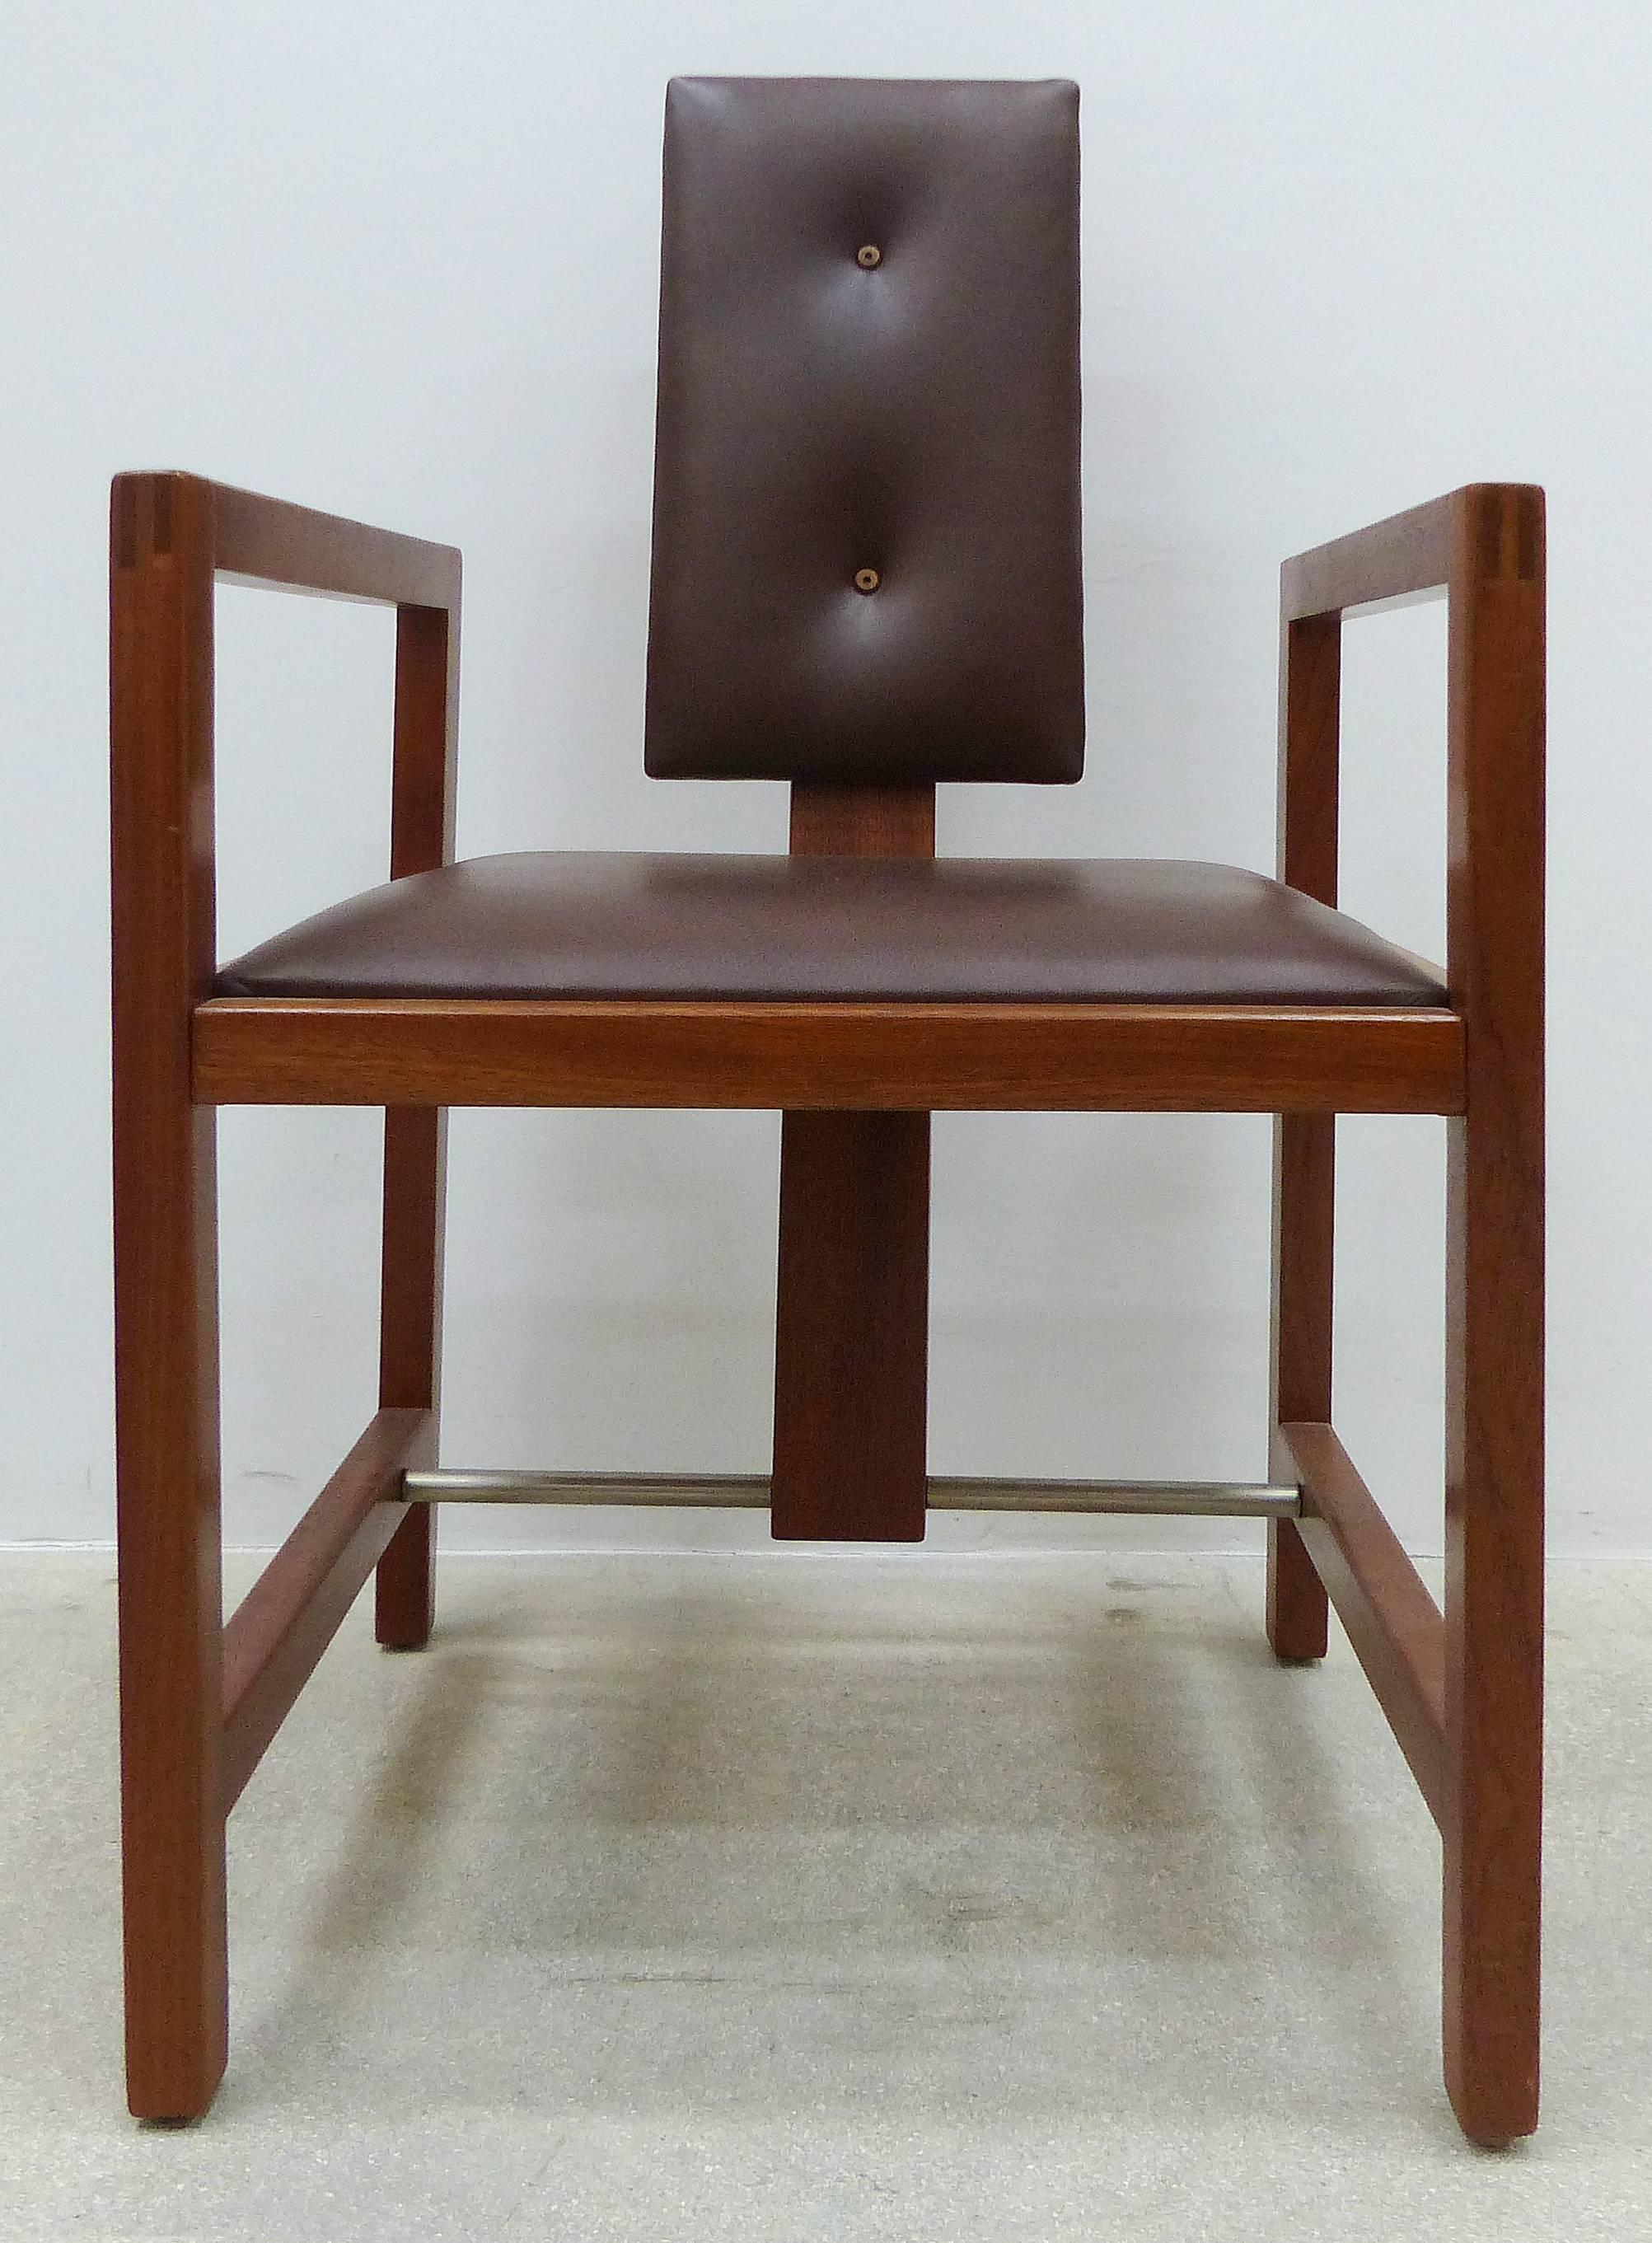 A set of four French Art Deco armchairs designed and made by Andre Sornay (1902-2000) in Lyon, France. Constructed of solid mahogany with the arms connected to the front and rear legs with an exposed finger joint. The back splat is ribbon mahogany